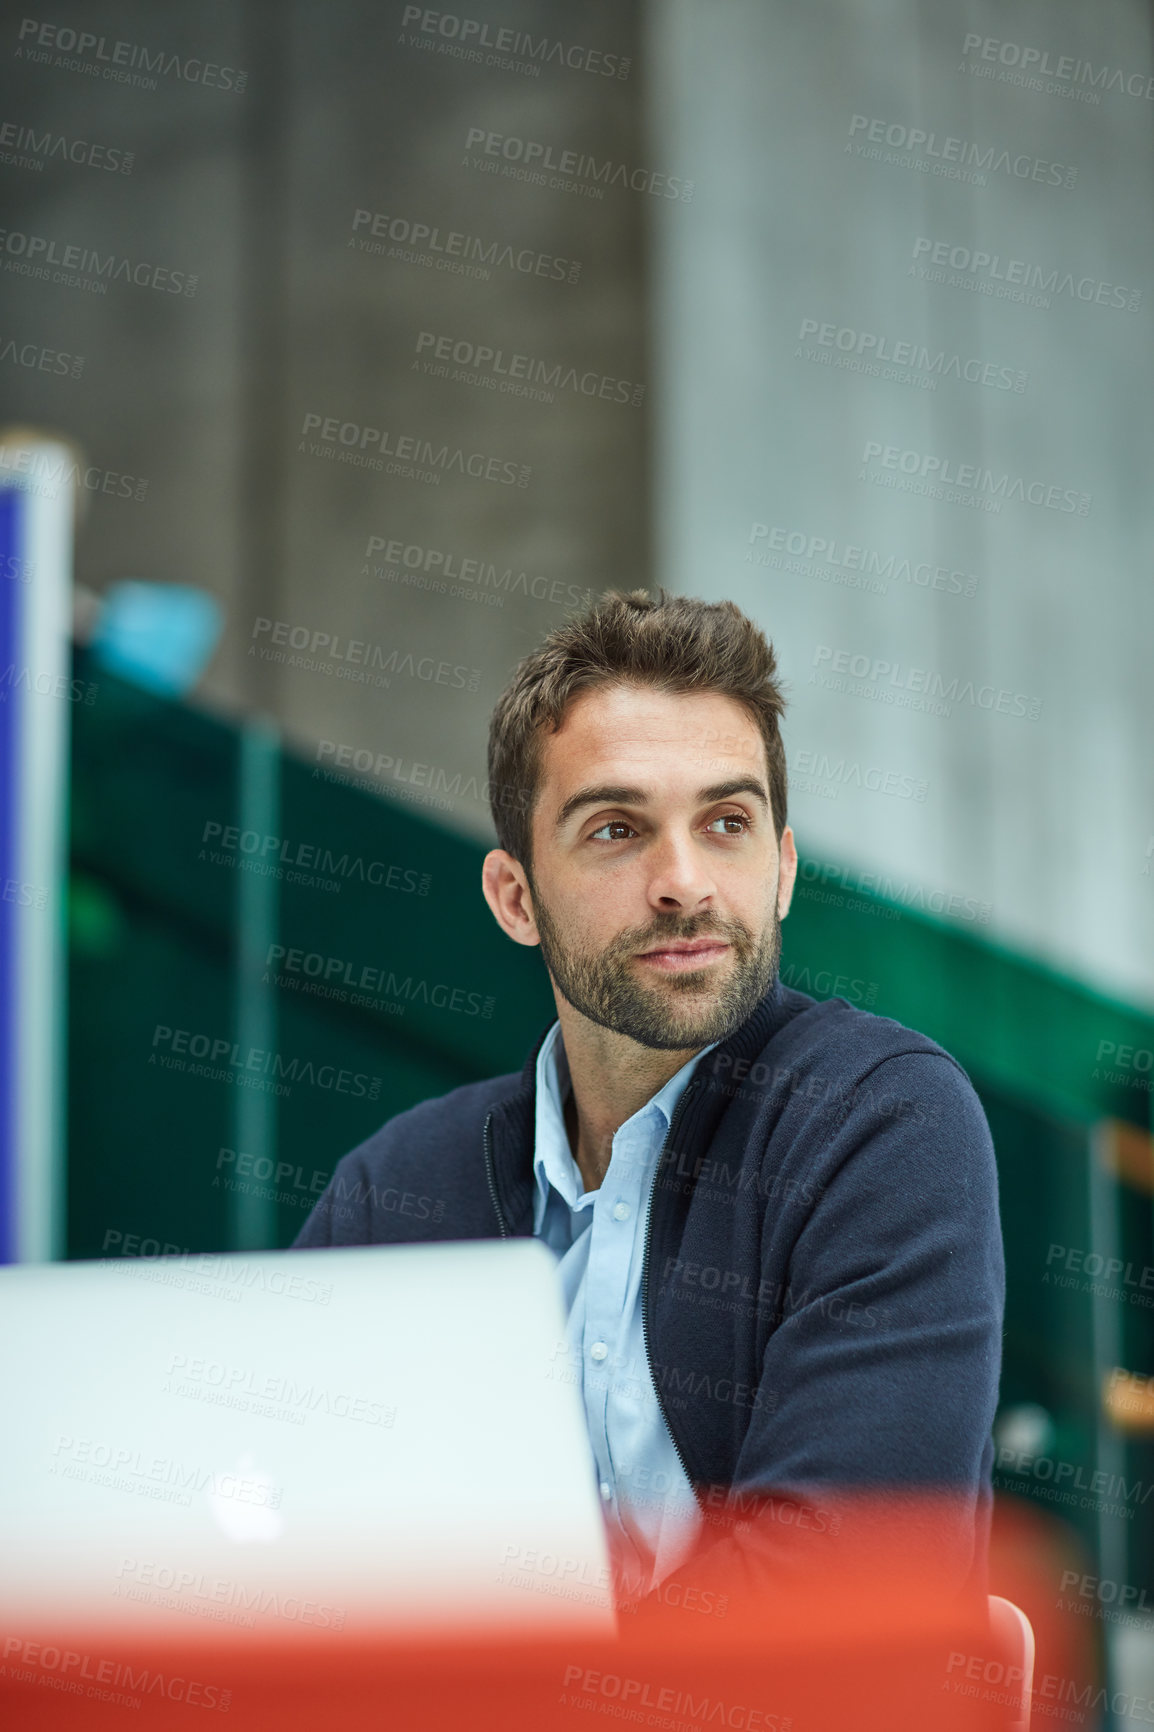 Buy stock photo Cropped shot of a handsome young businessman sitting alone in an office space and looking contemplative while using a laptop